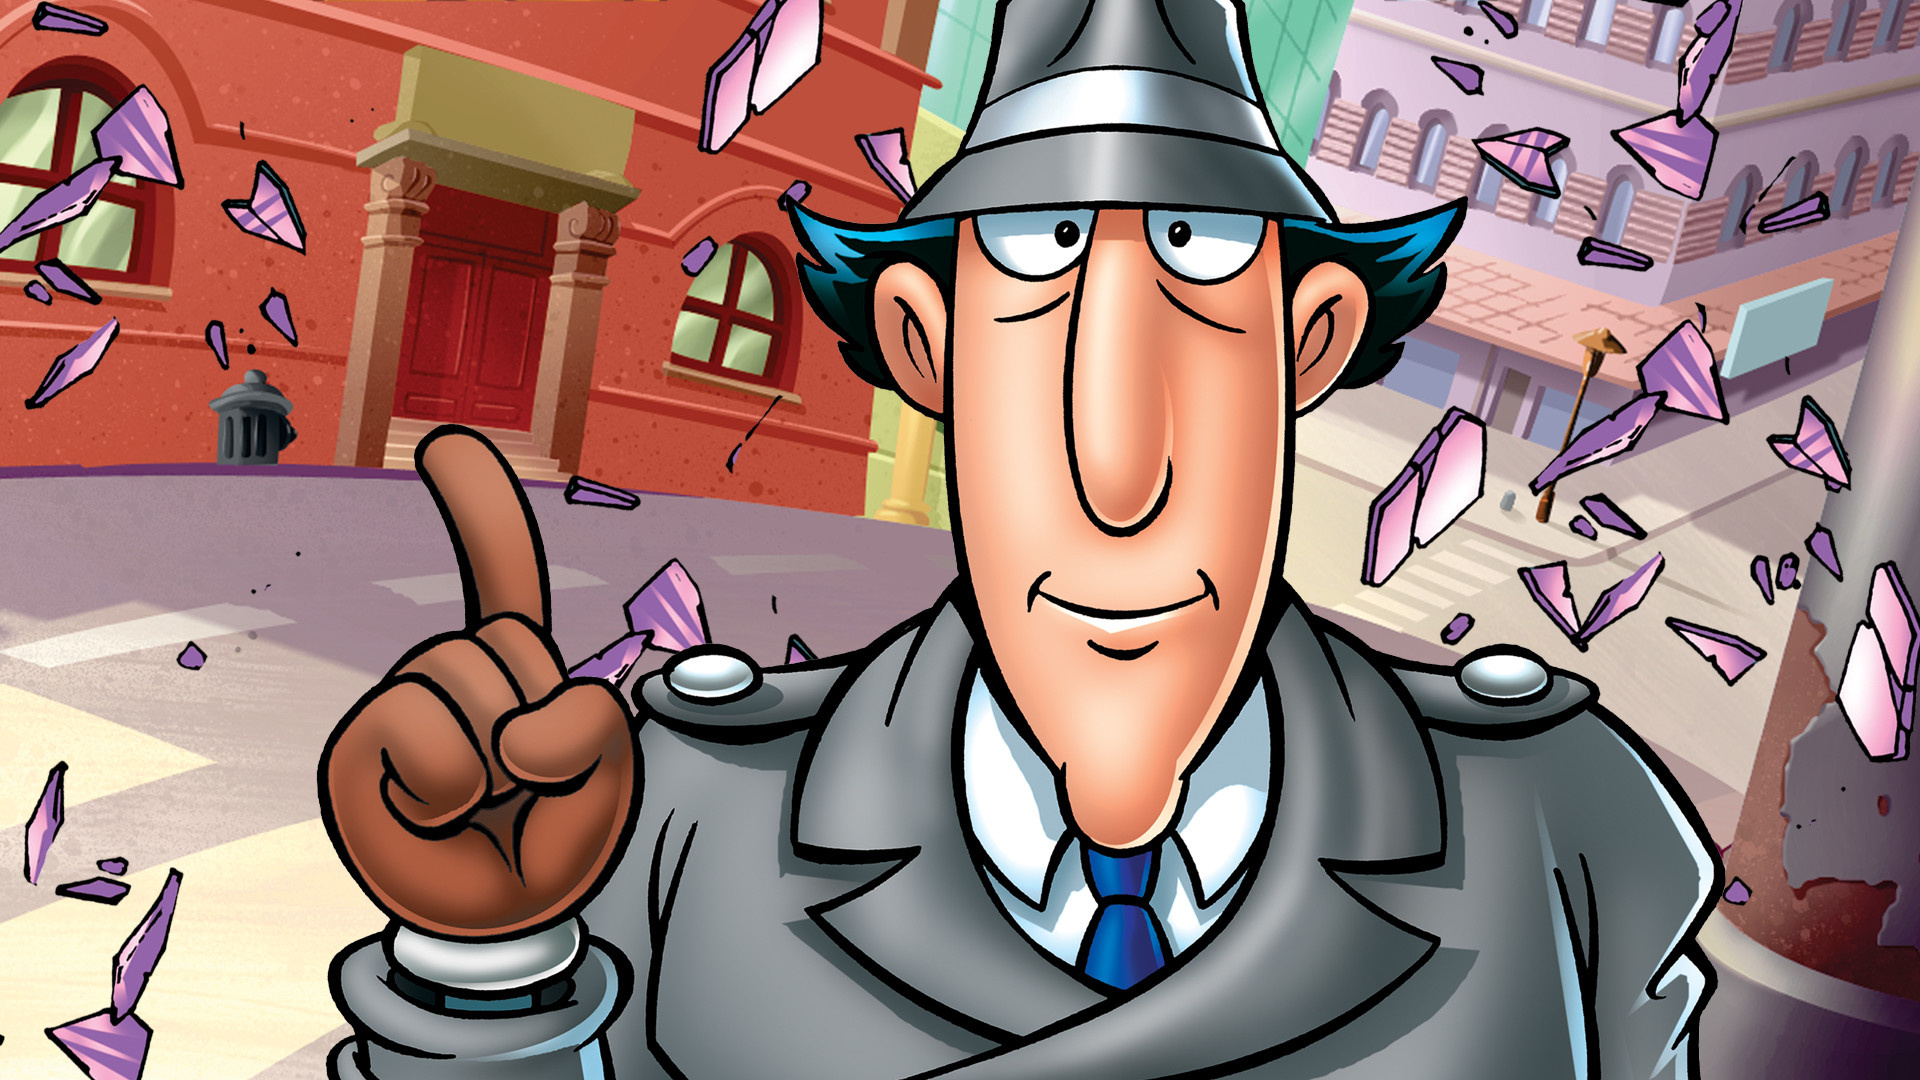 HD wallpaper, Detailed Gameplay, Exciting Missions, Inspector Gadget Game, 1920X1080 Full Hd Desktop, Desktop Full Hd Inspector Gadget Wallpaper, Operation Madkactus